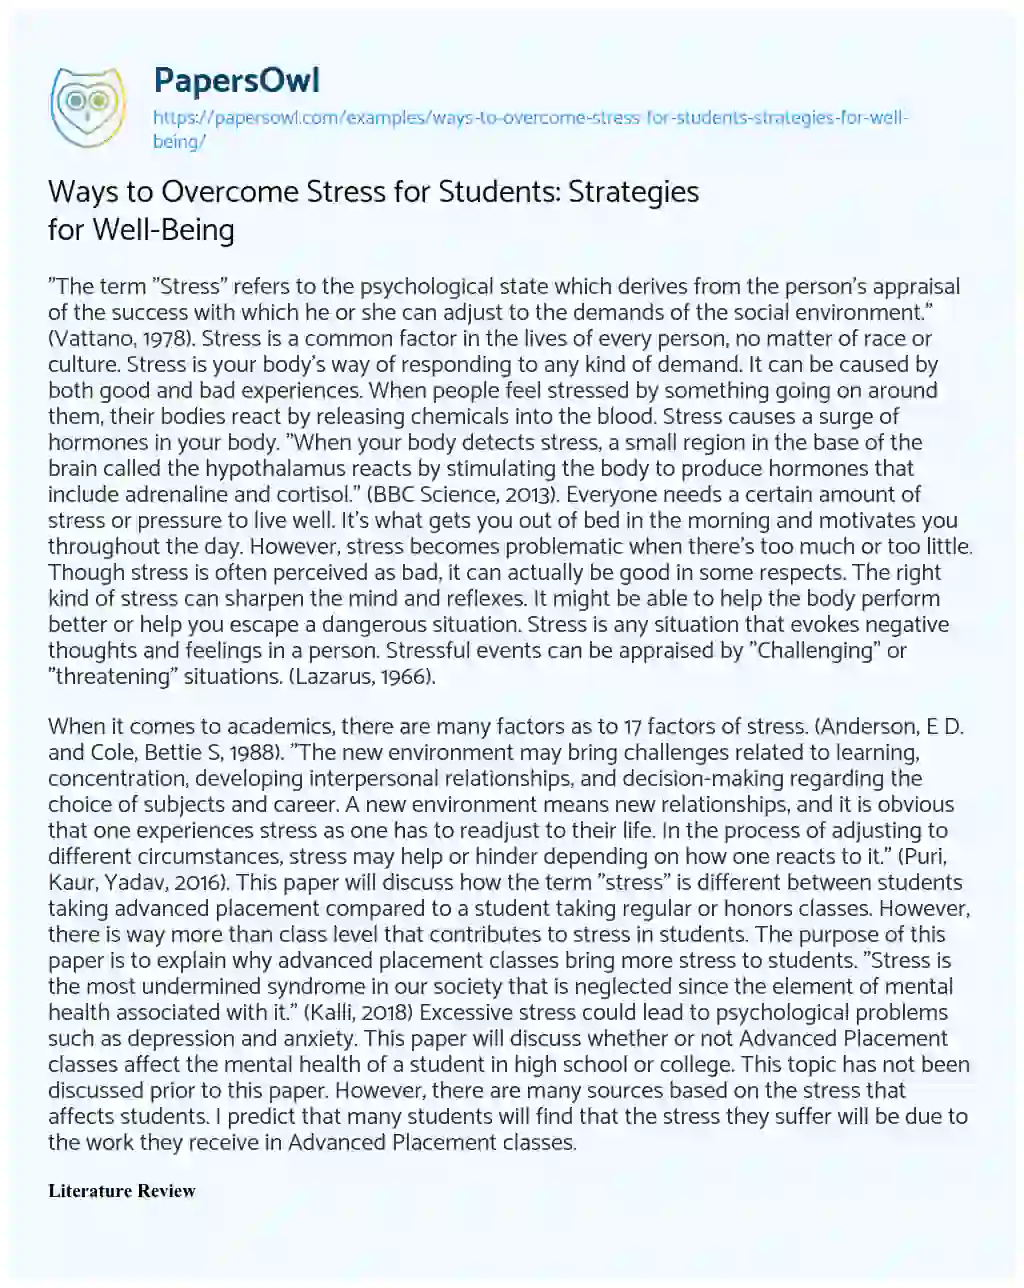 Essay on Ways to Overcome Stress for Students: Strategies for Well-Being